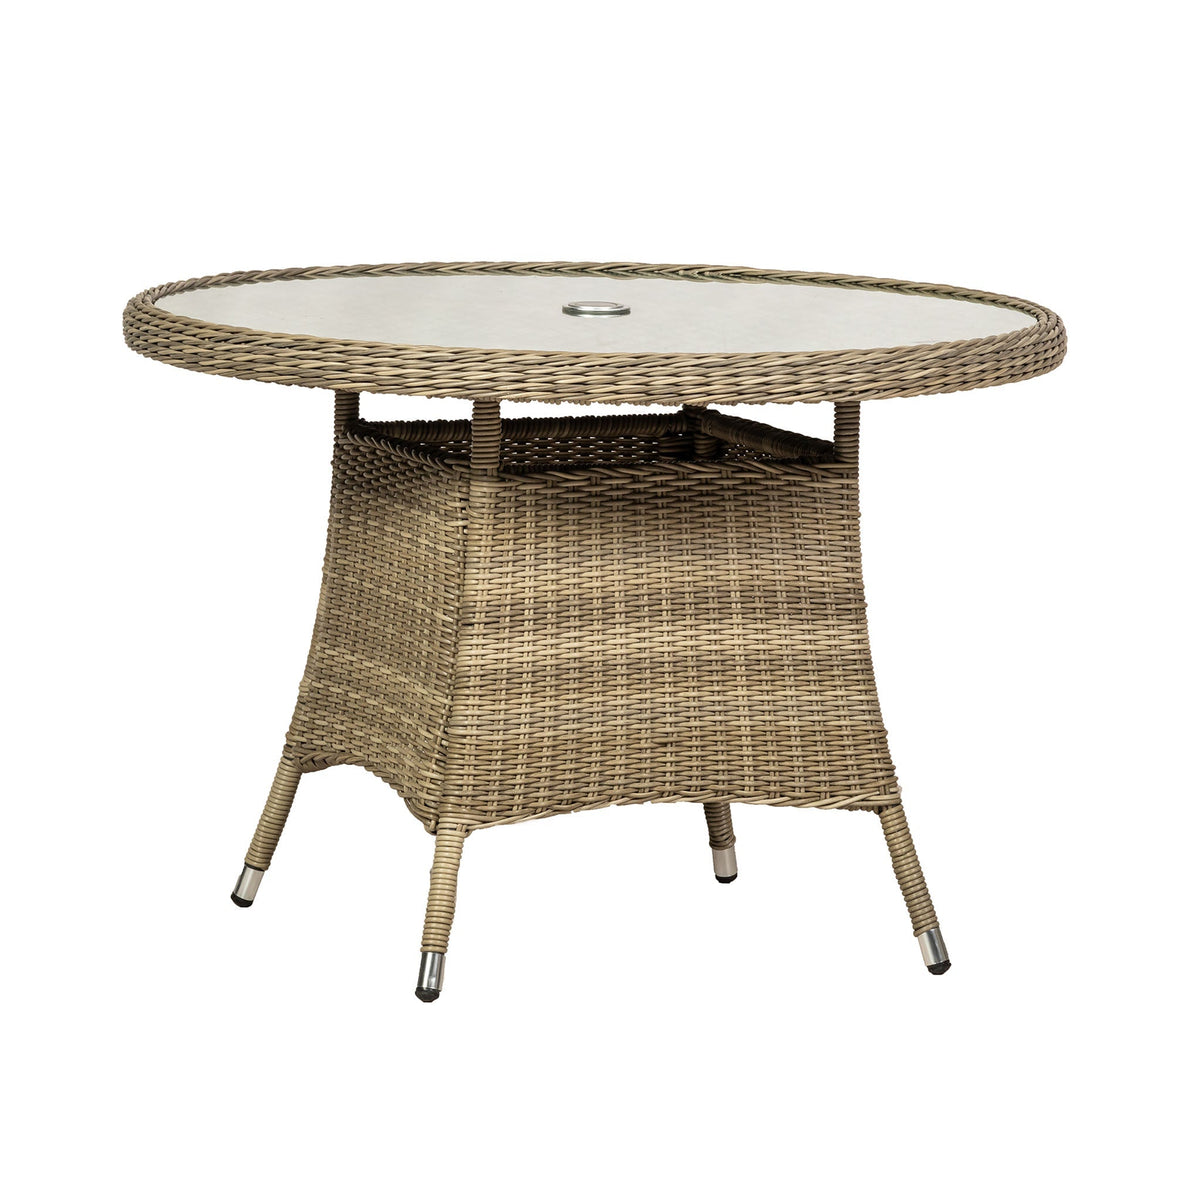 Wentworth 110cm 4 Seater Rattan Round Garden Dining Table with Glass top